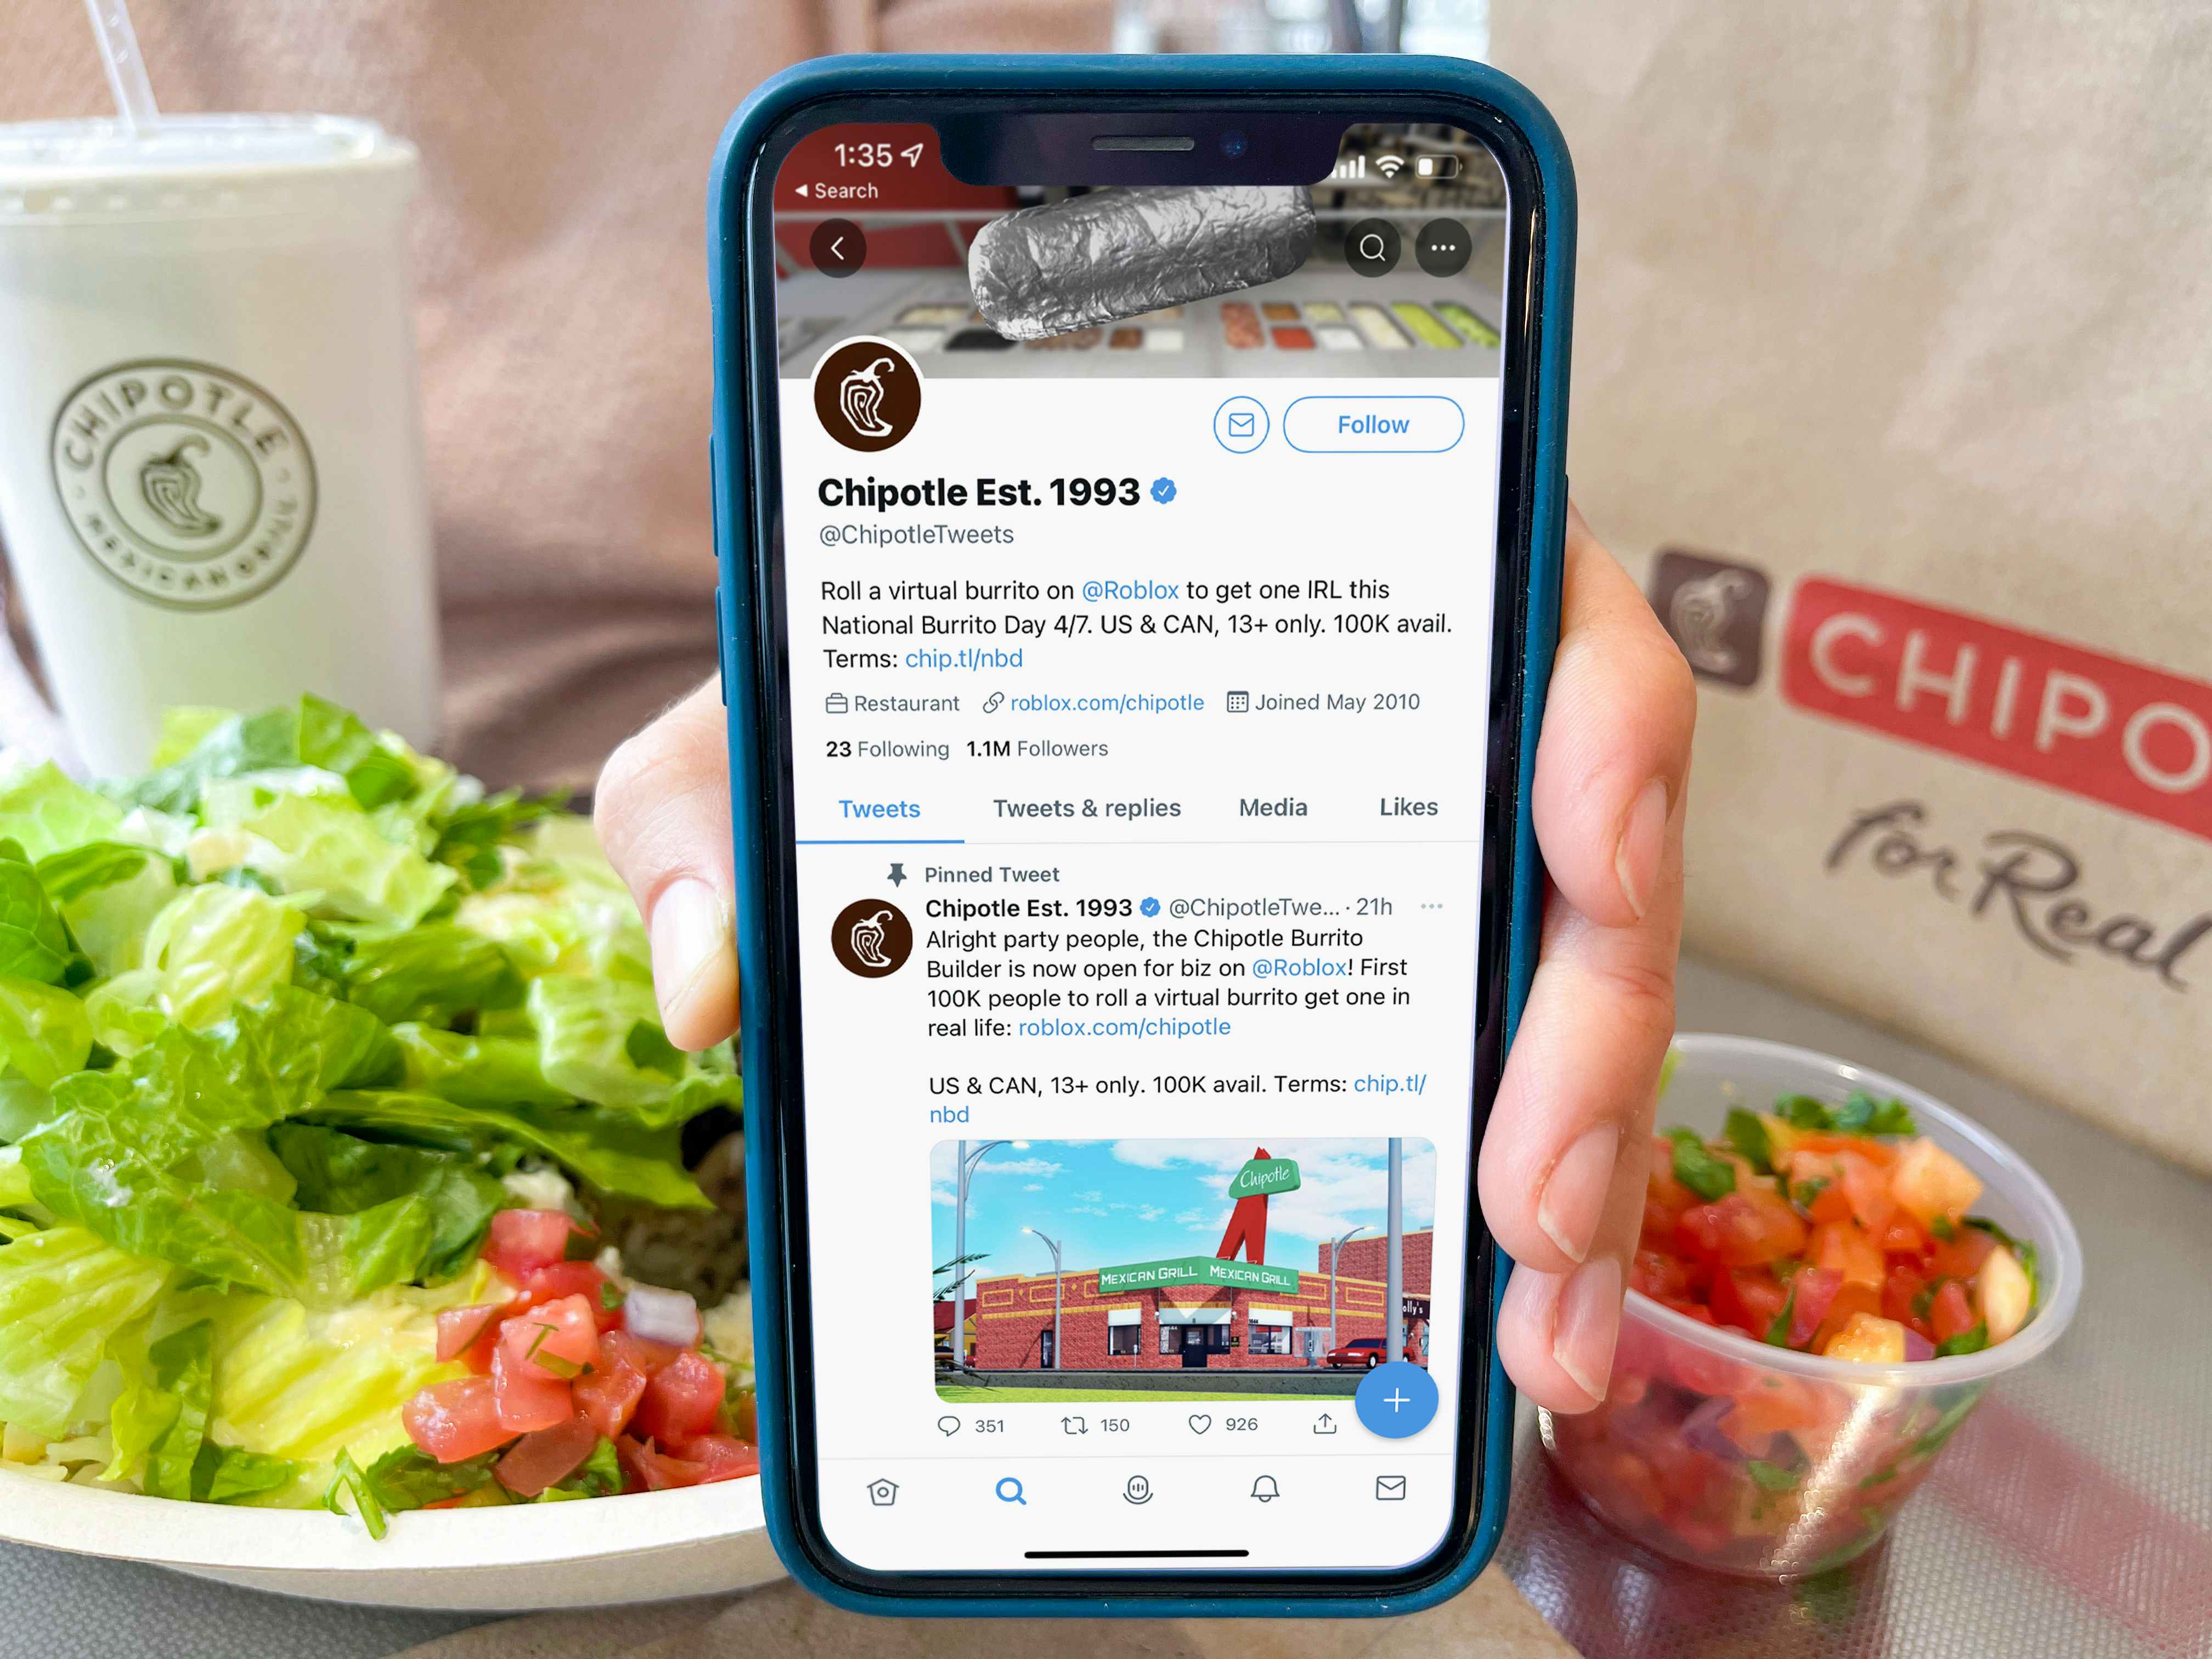 A person's hand holding up a phone displaying the Chipotle Twitter page in front of Chipotle food and takeout bag on a table.